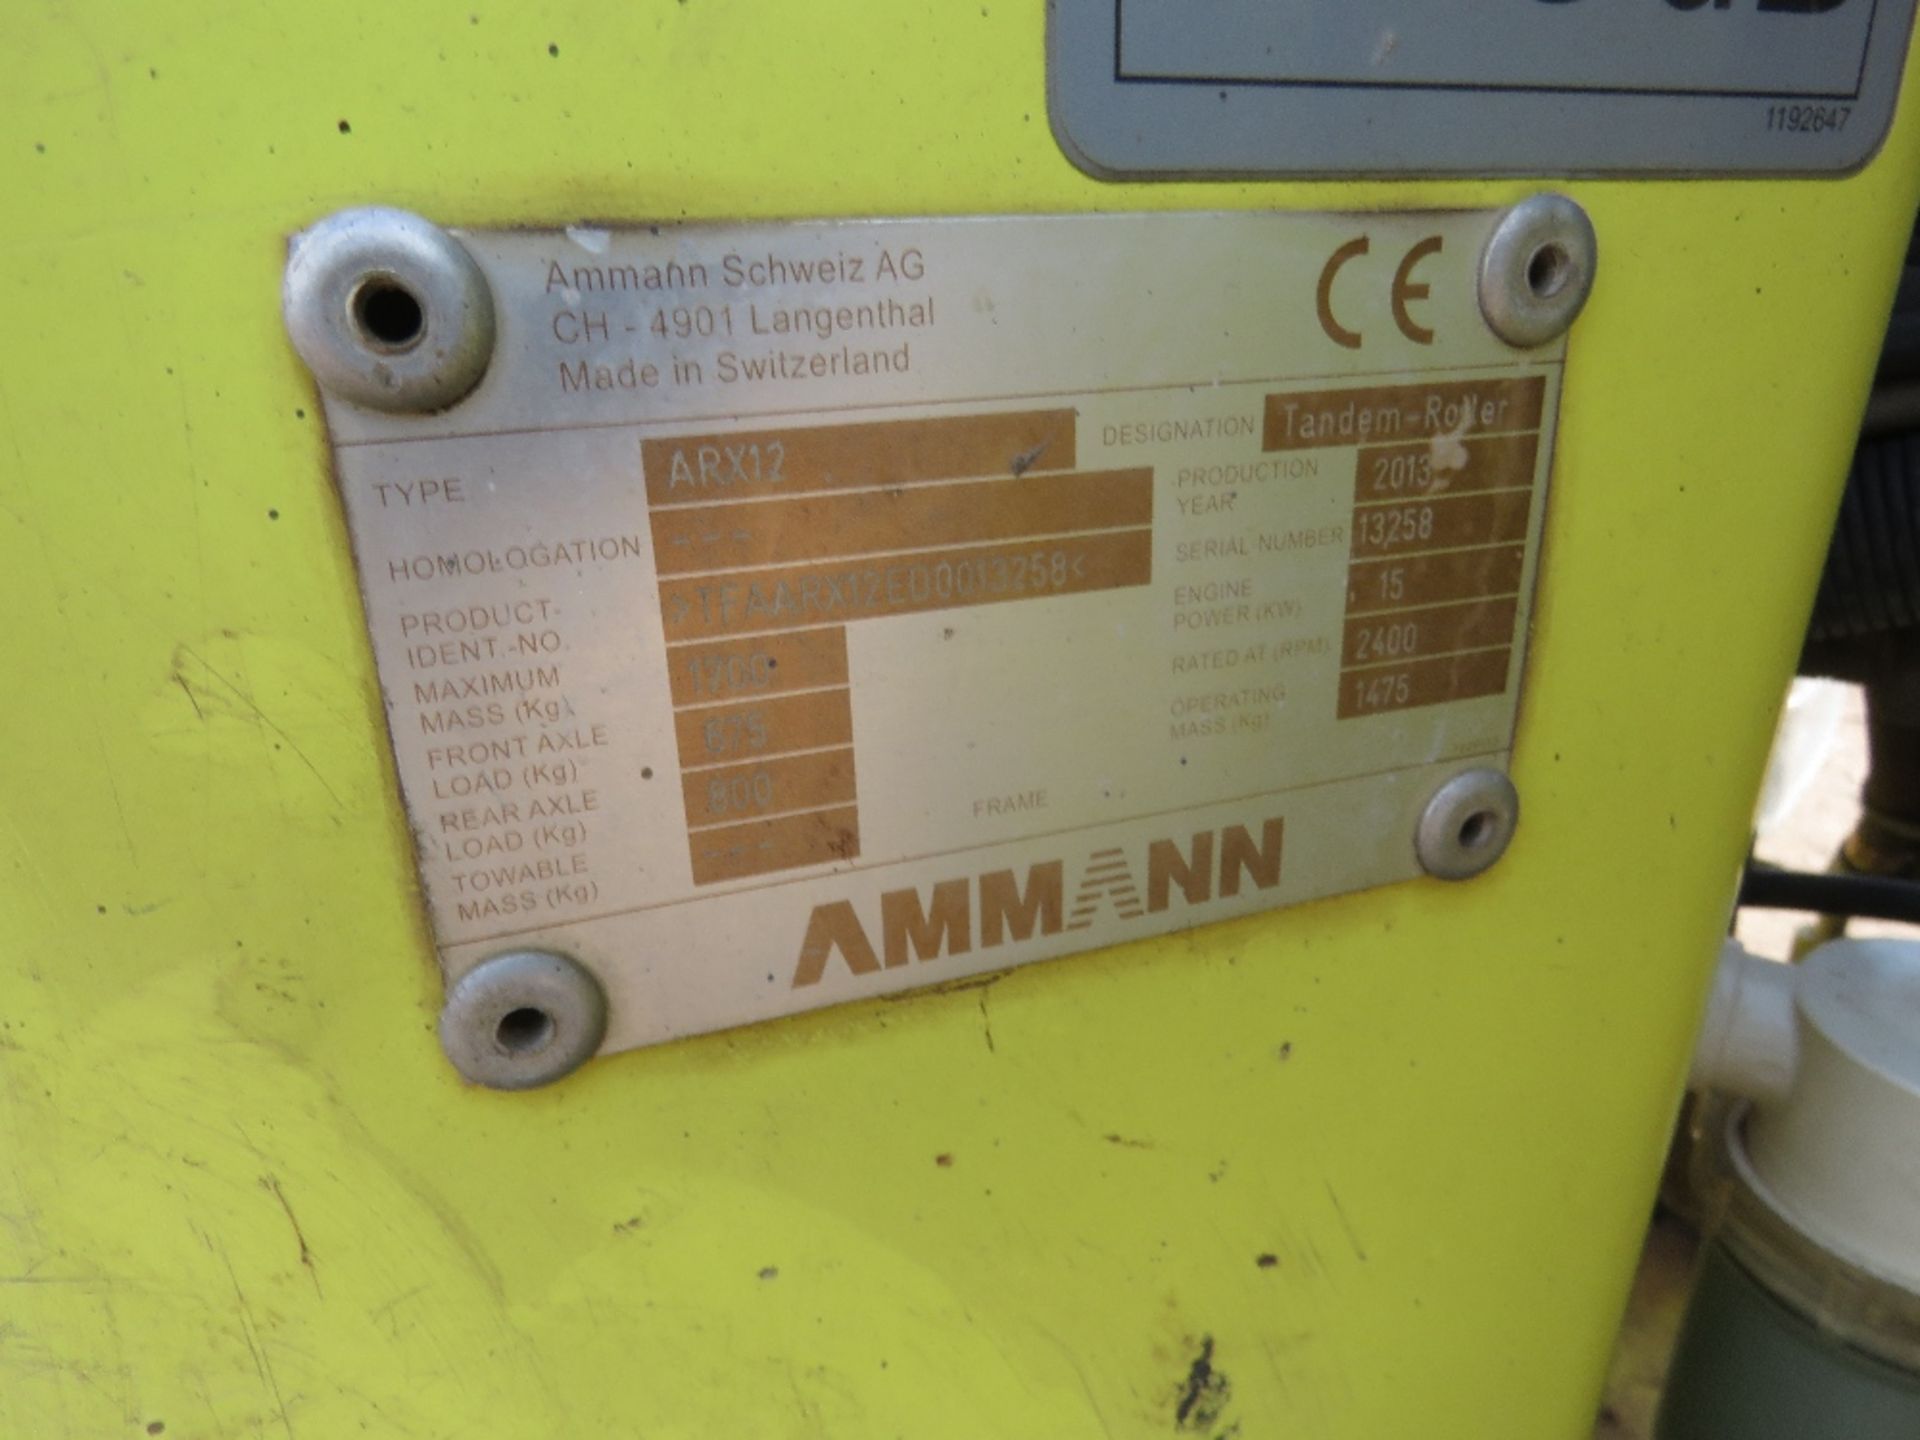 AMMANN ARX12 DOUBLE DRUM RIDE ON ROLLER YEAR 2013 BUILD. 812.3 REC HOURS. SN:TFAARX12ED0013258. DIRE - Image 13 of 13